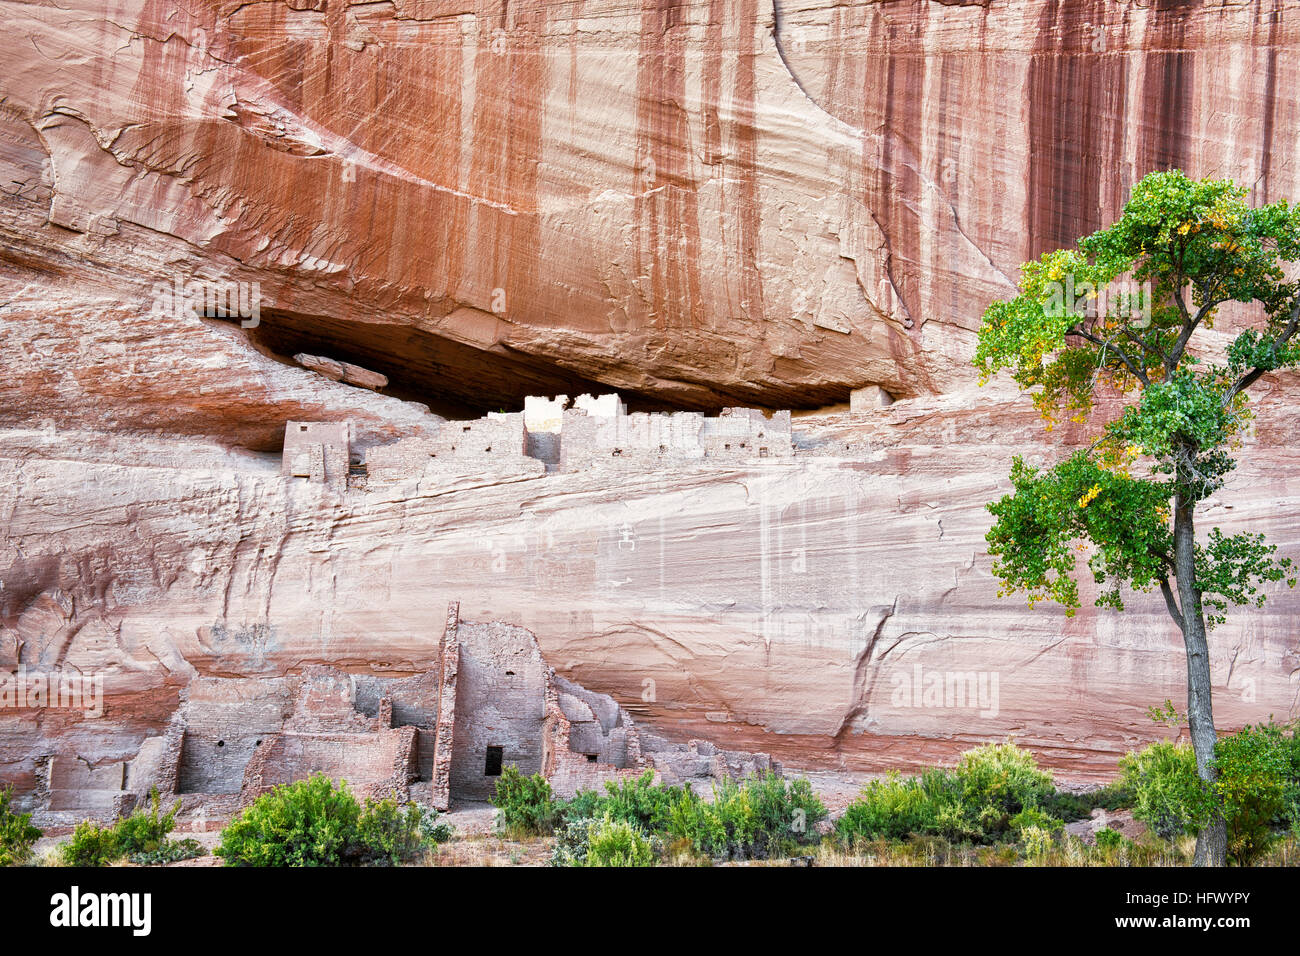 Stripes of desert varnish above the Anasazi cliff dwellings known as White House Ruins in Arizona's Canyon de Chelly National Monument. Stock Photo